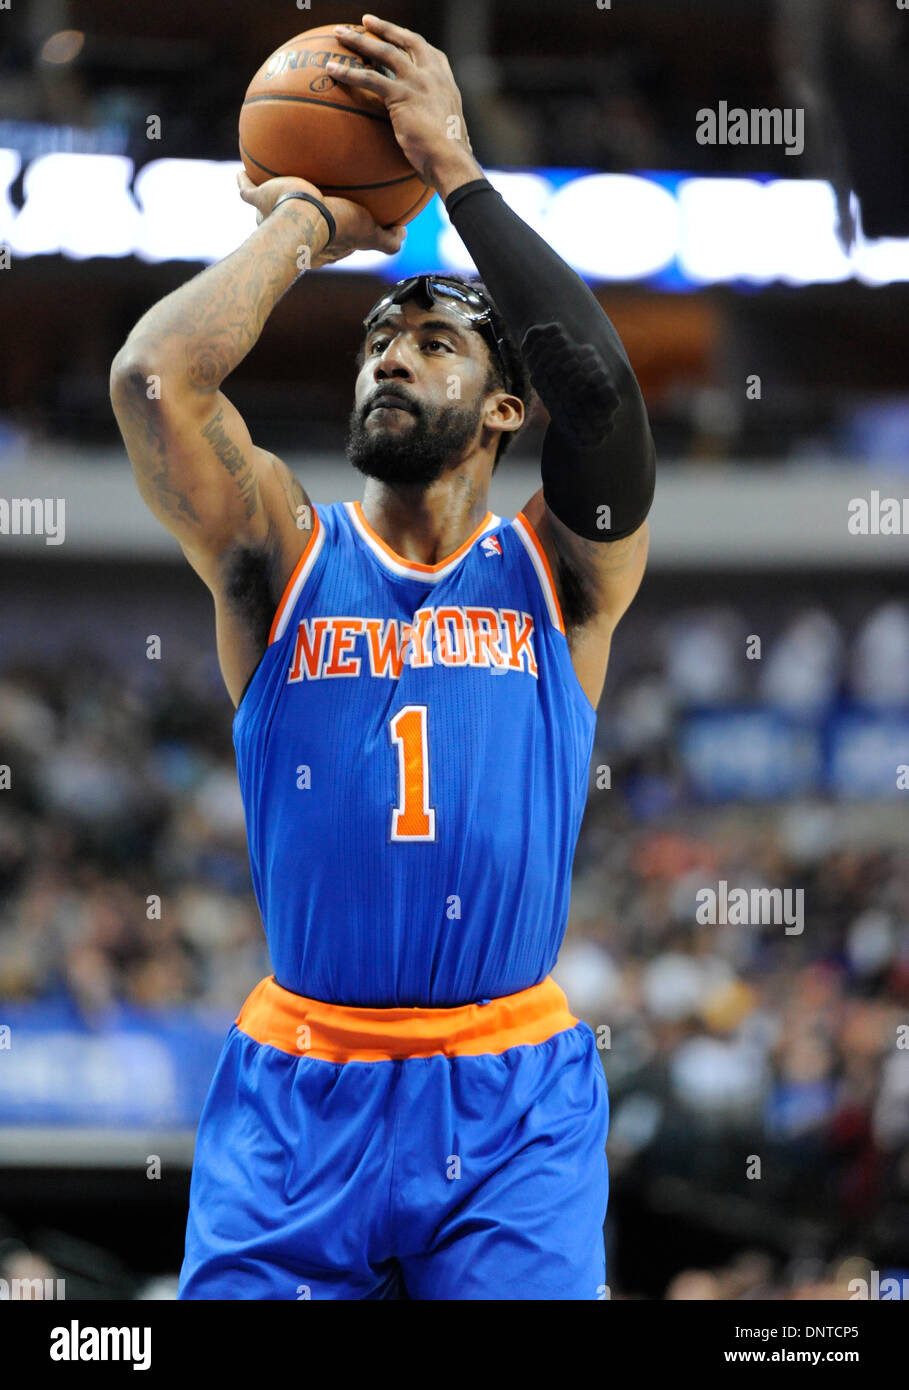 Photo: New York Knicks Amar'e Stoudemire dunks at Madison Square Garden in  New York - NYP20110124108 